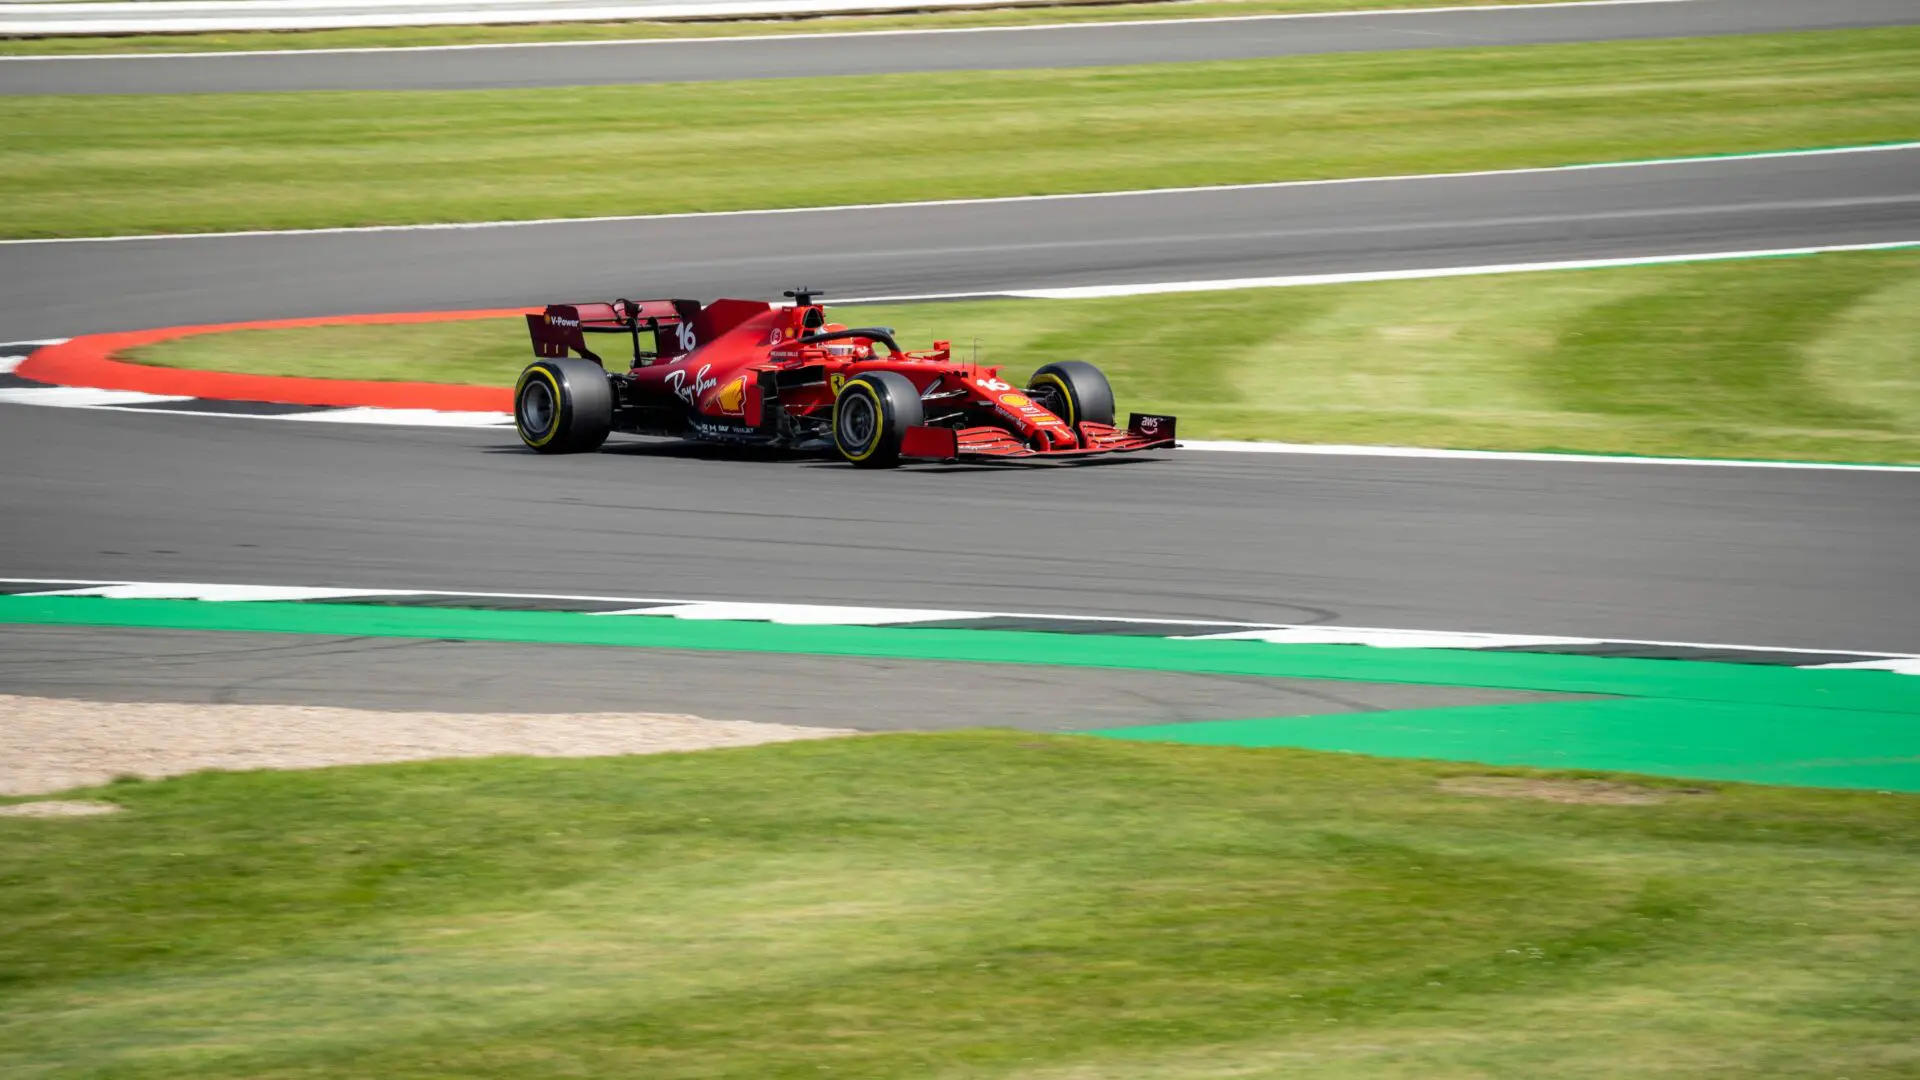 Racing car on the silverstone track